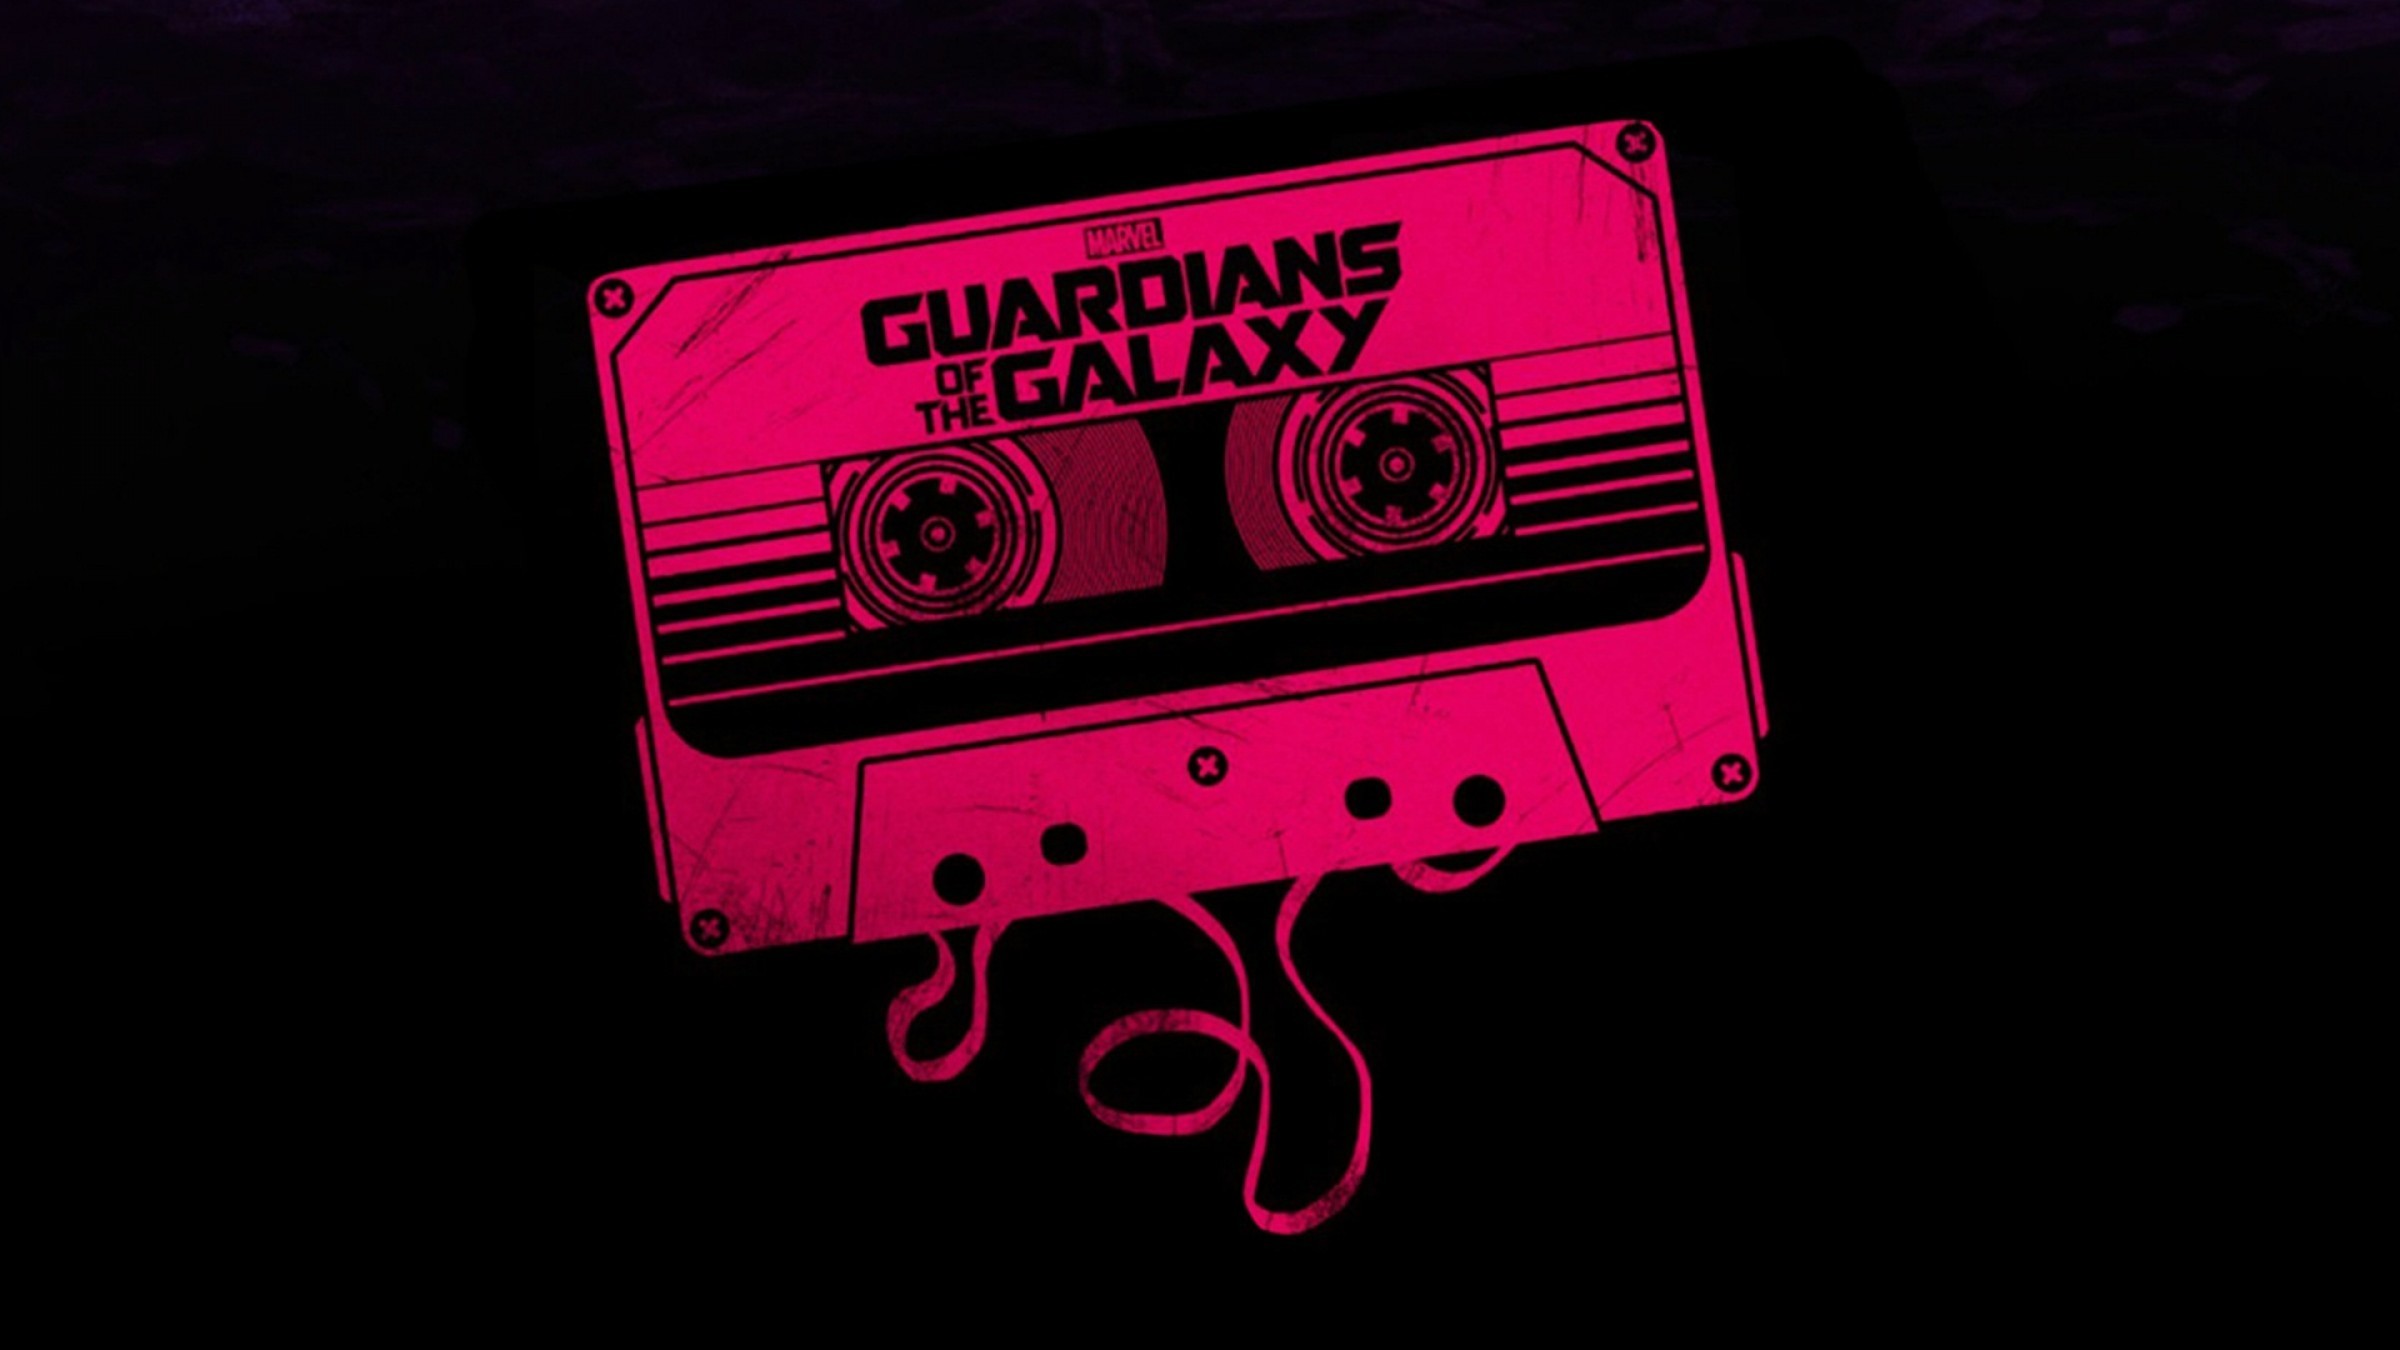 General 2400x1350 Guardians of the Galaxy Star-Lord Gamora  Rocket Raccoon Groot Drax the Destroyer Marvel Cinematic Universe movies cassette simple background black background red Marvel Comics